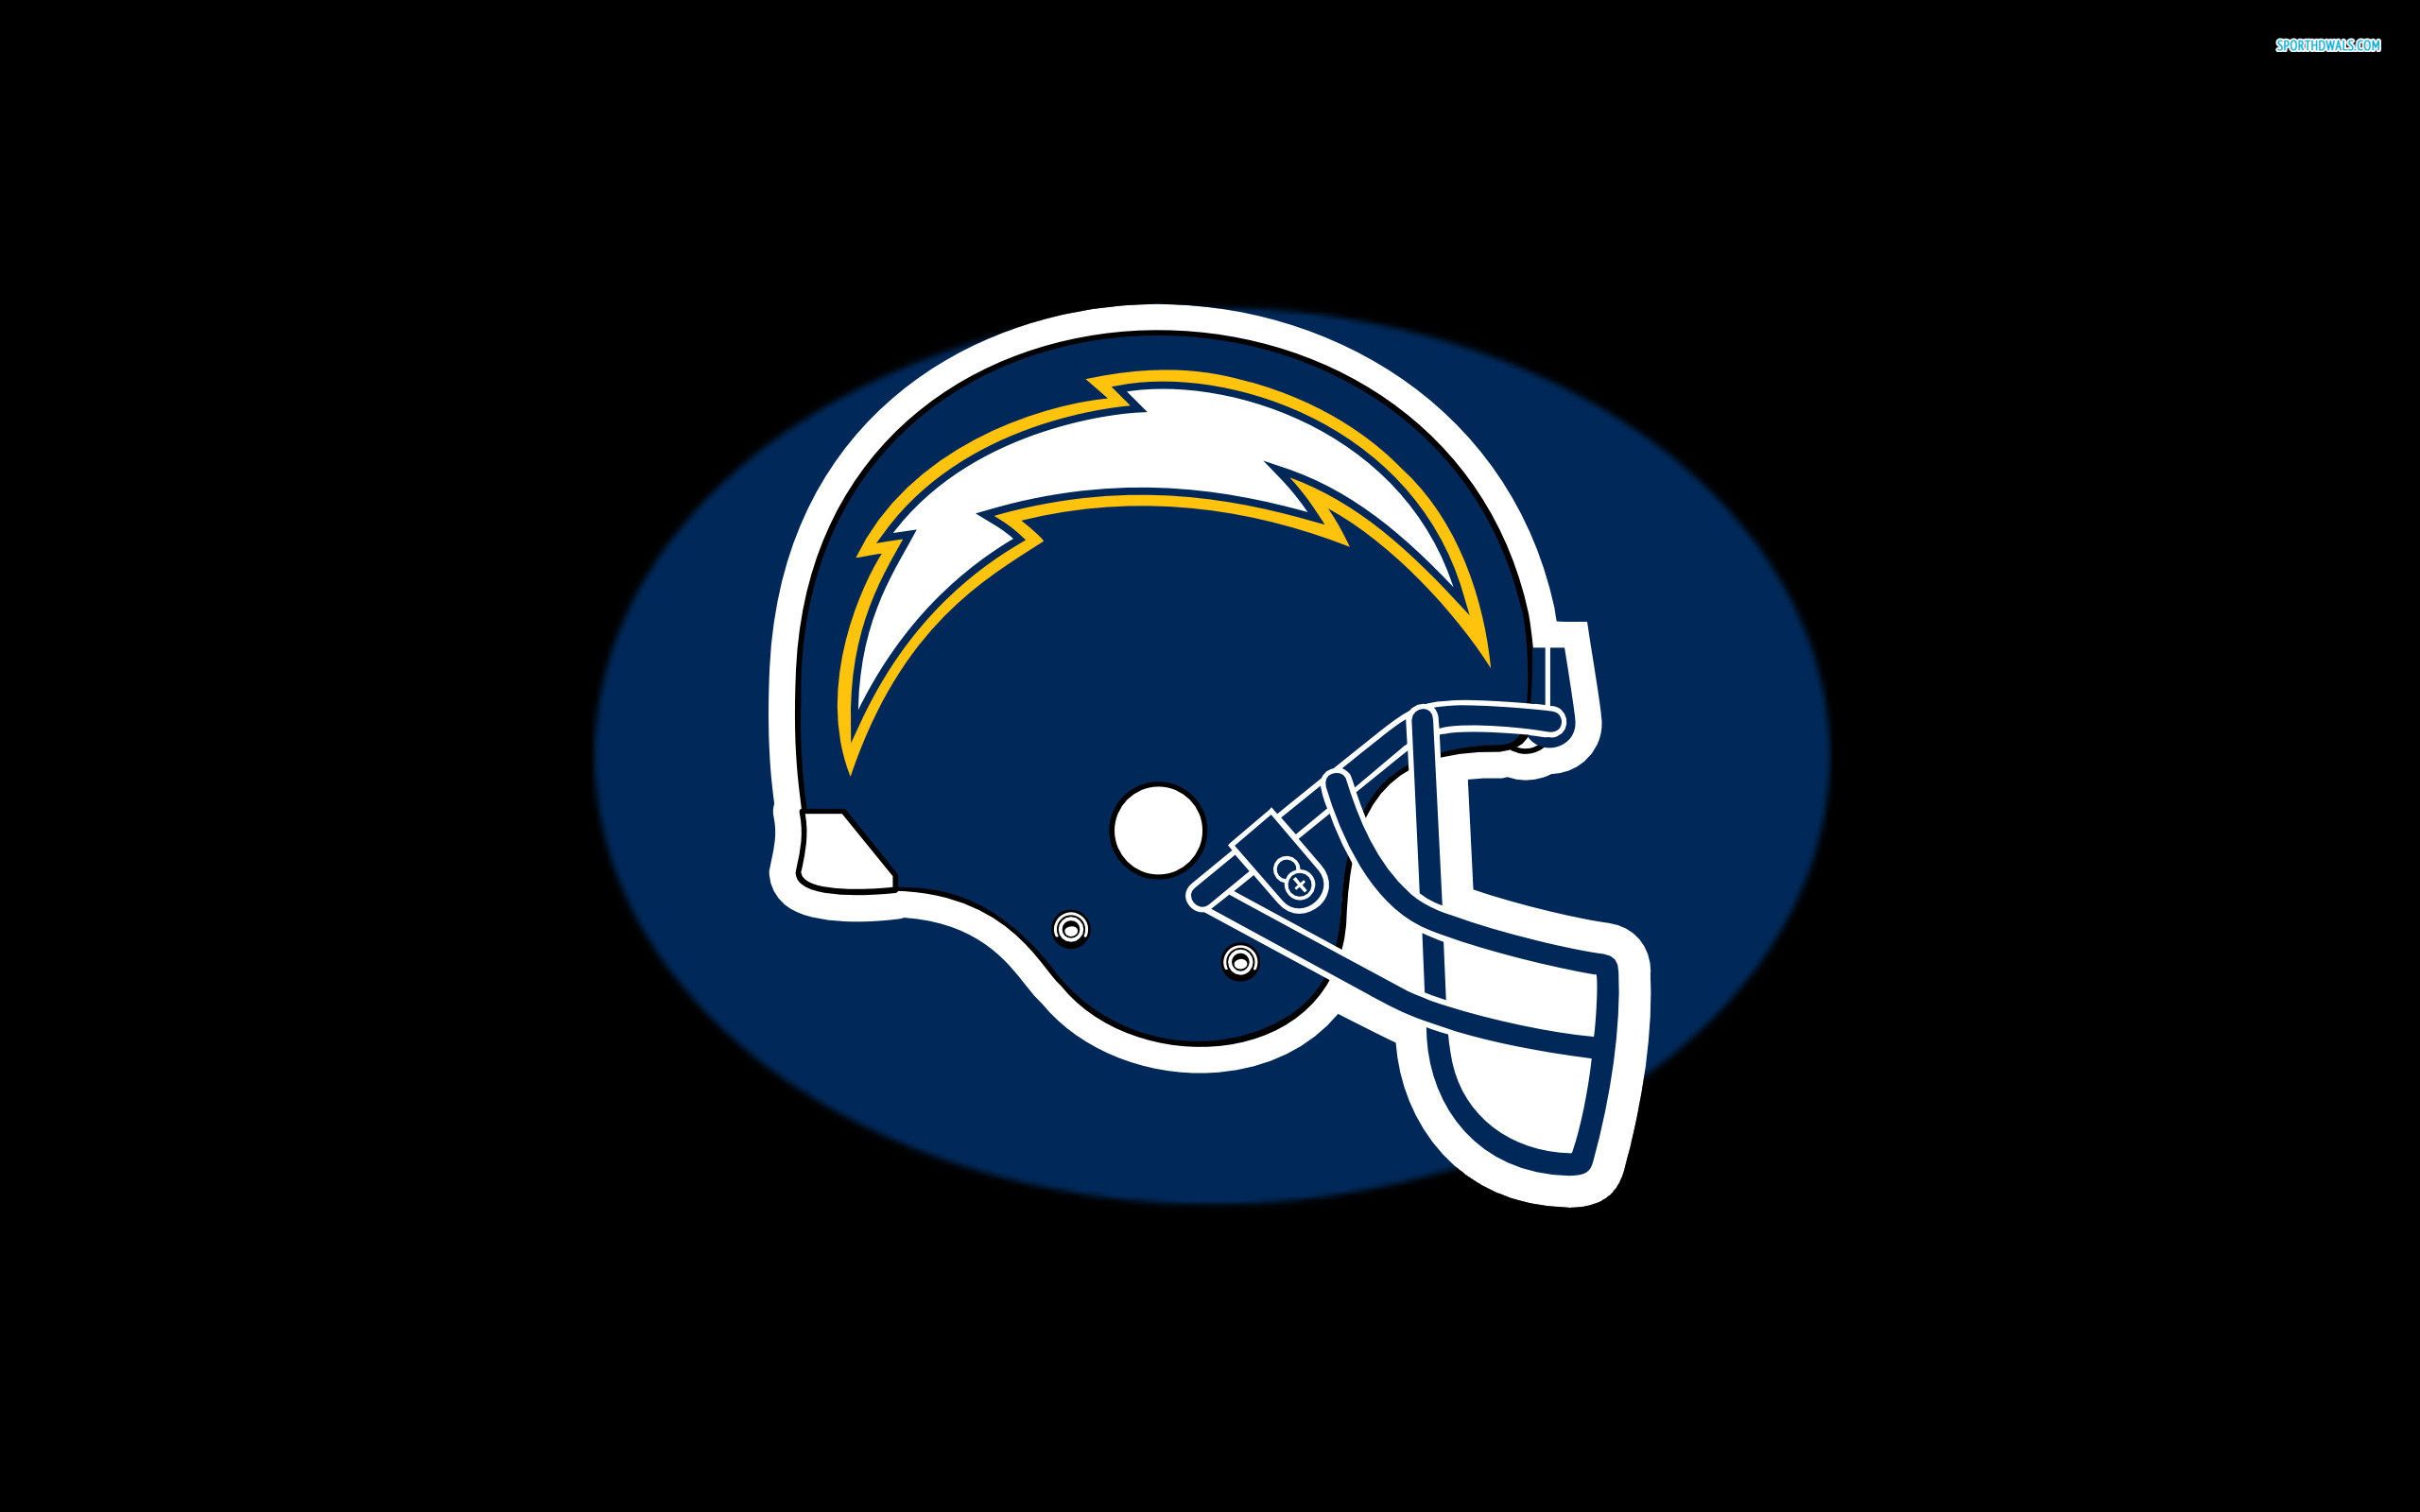 Chargers 2020 Wallpapers